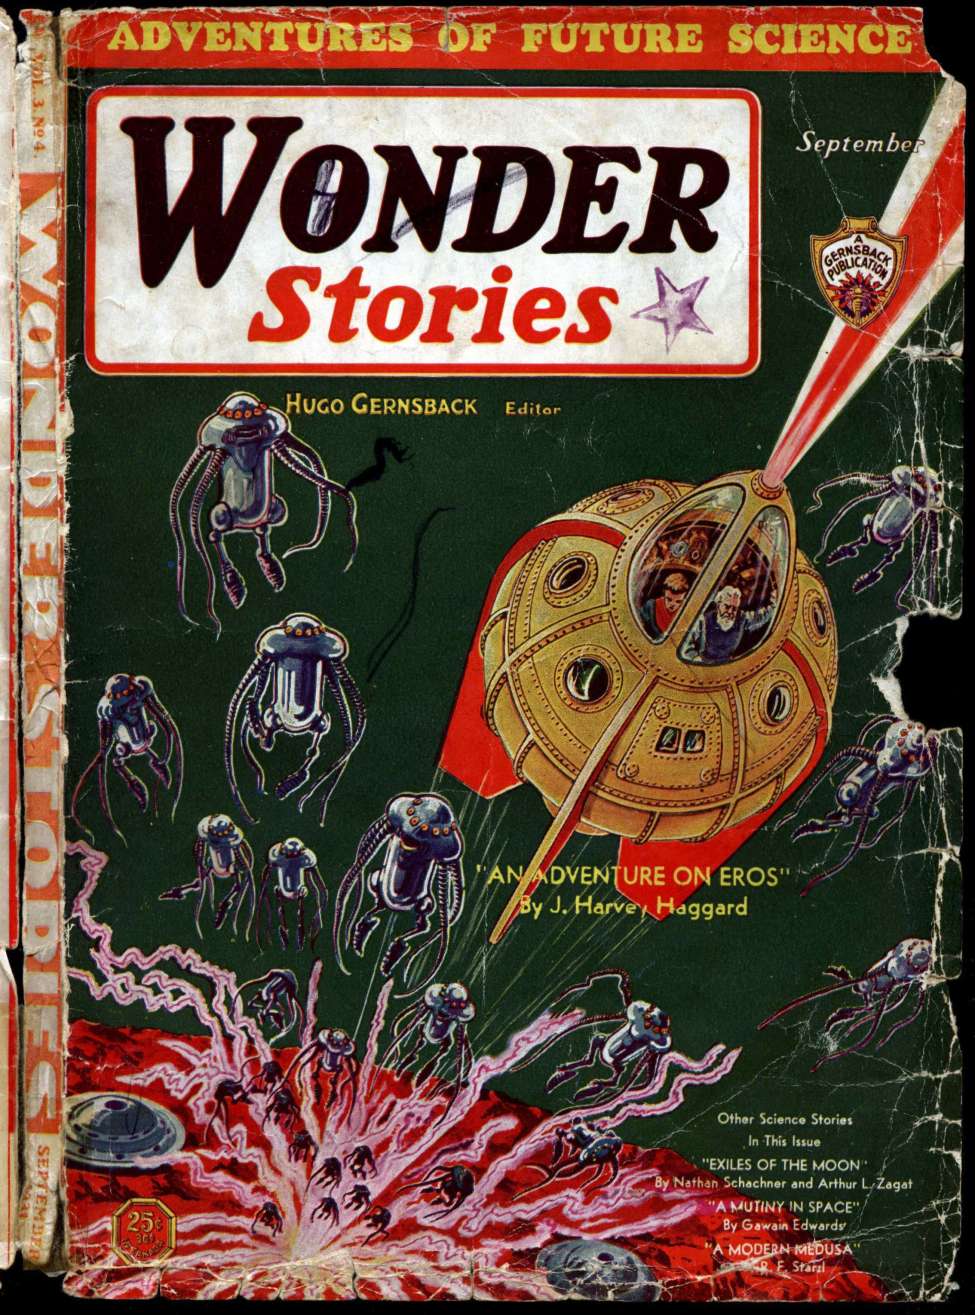 Comic Book Cover For Wonder Stories v3 4 - Exiles of the Moon - Nat Schachner